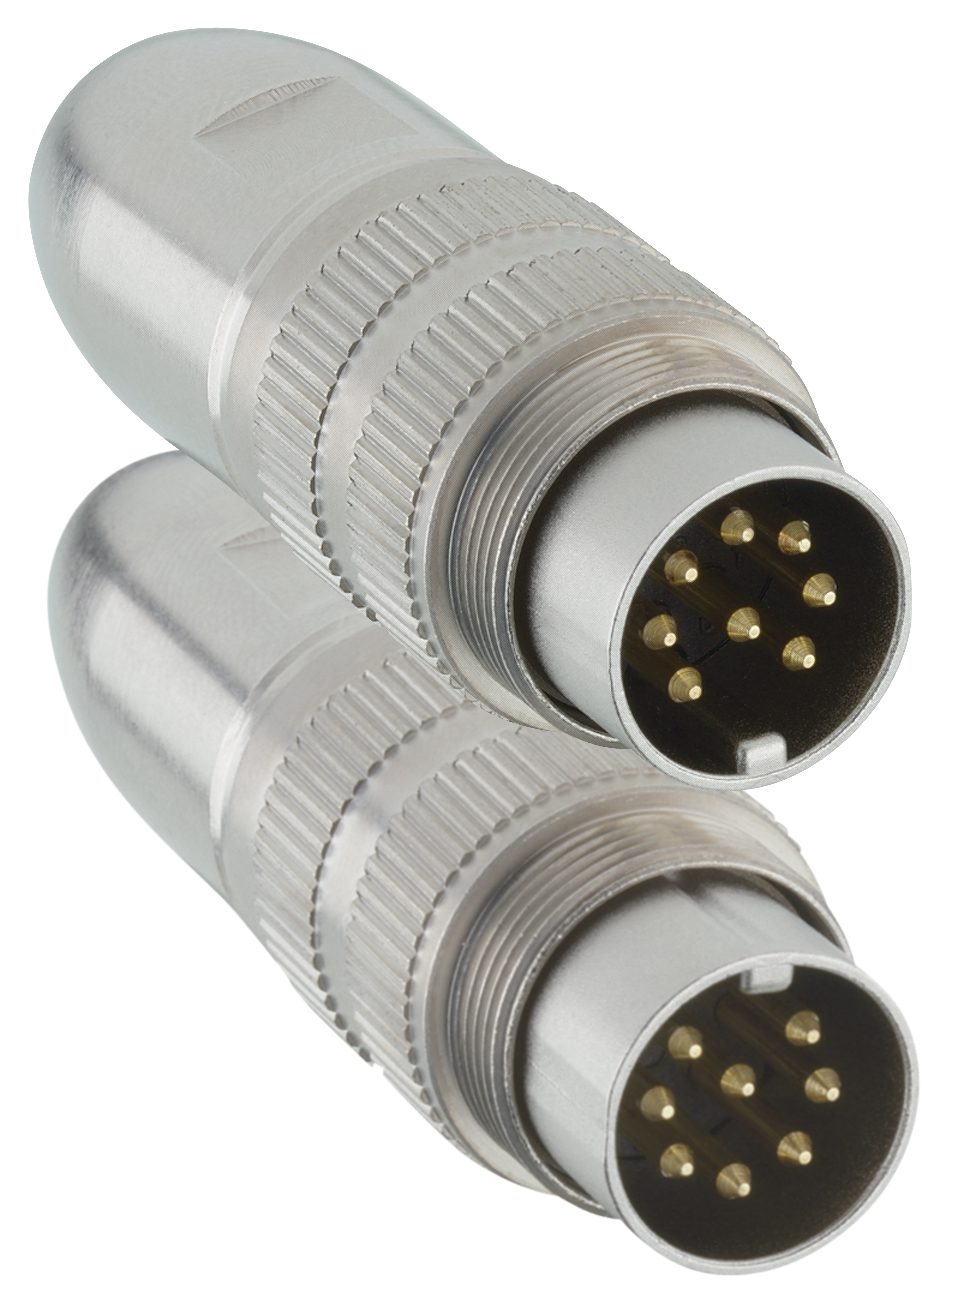 Lumberg’s new 360° shielded screw-type circular connector